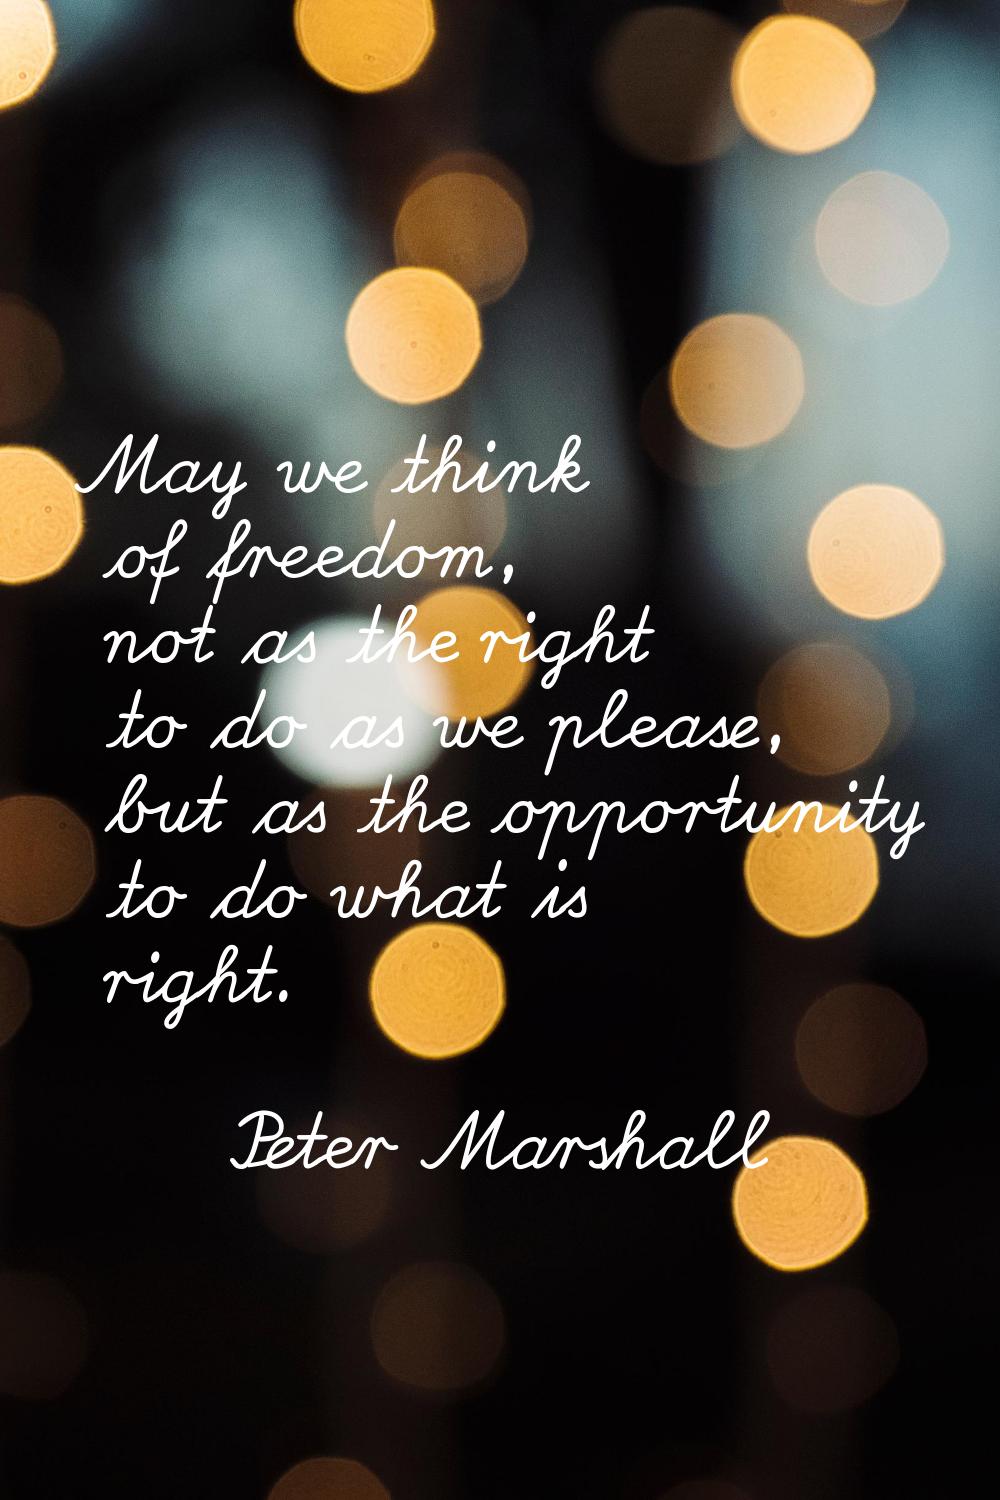 May we think of freedom, not as the right to do as we please, but as the opportunity to do what is 